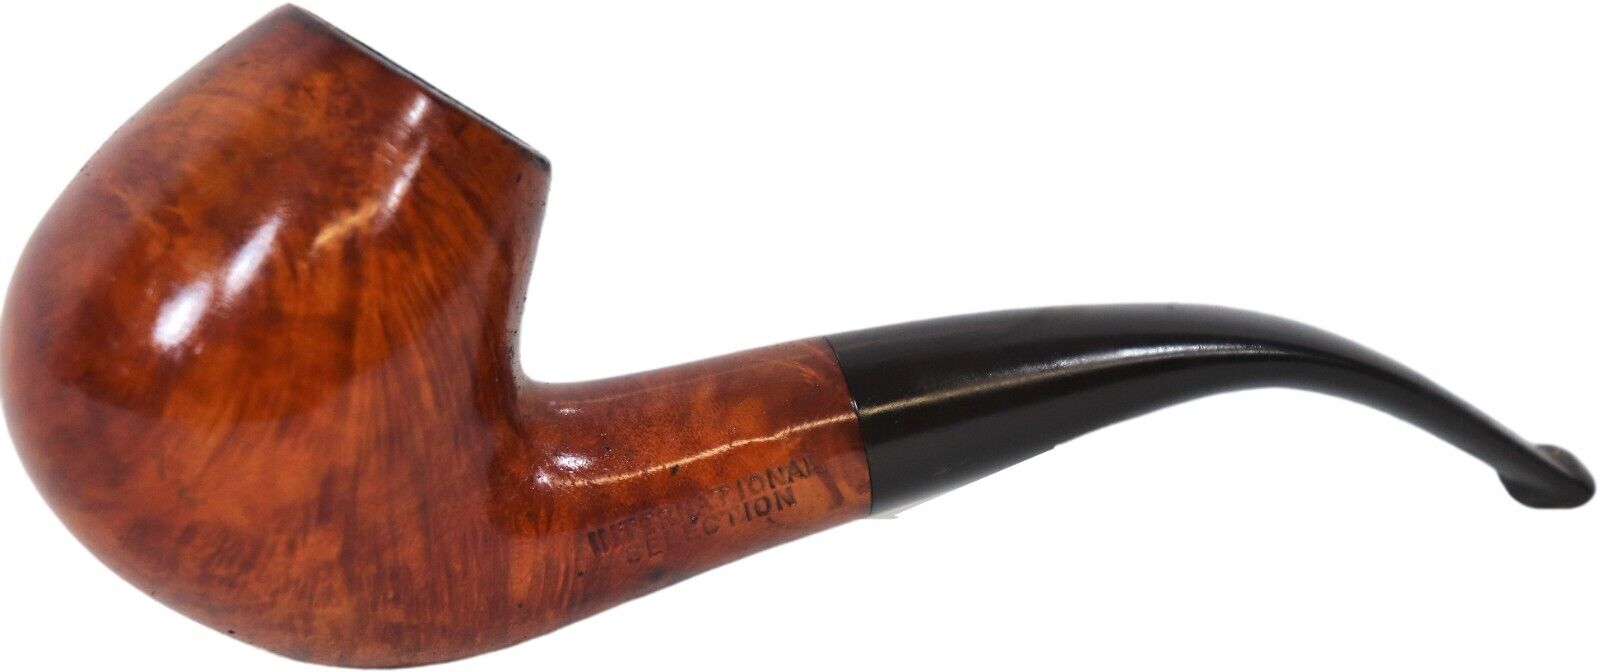 OLD Great CLASSIC Pipe INTERNATIONAL SELECTION